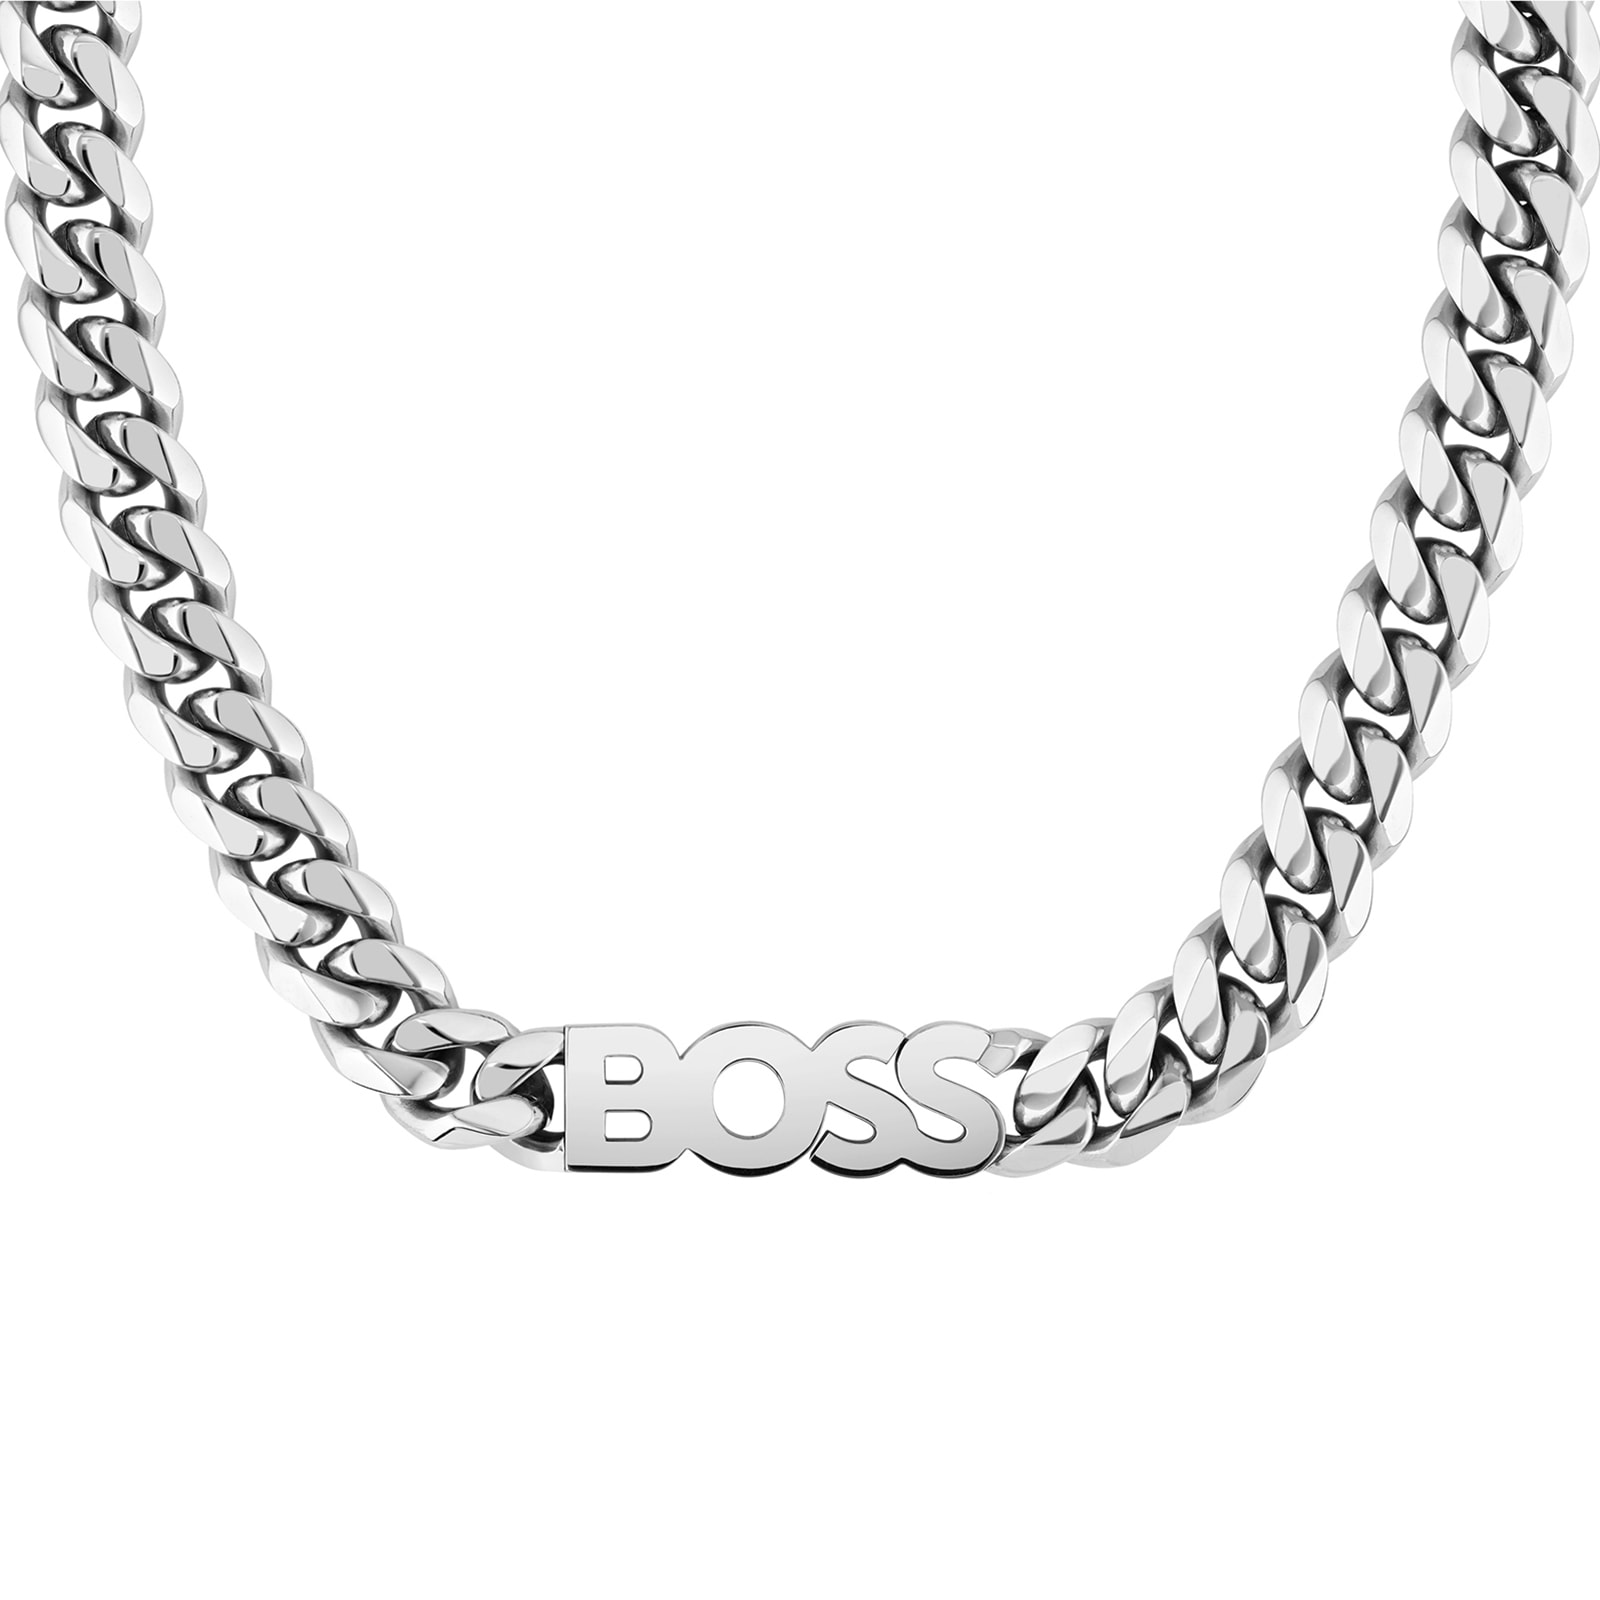 Mens Kassy Stainless Steel Chain Logo Necklace